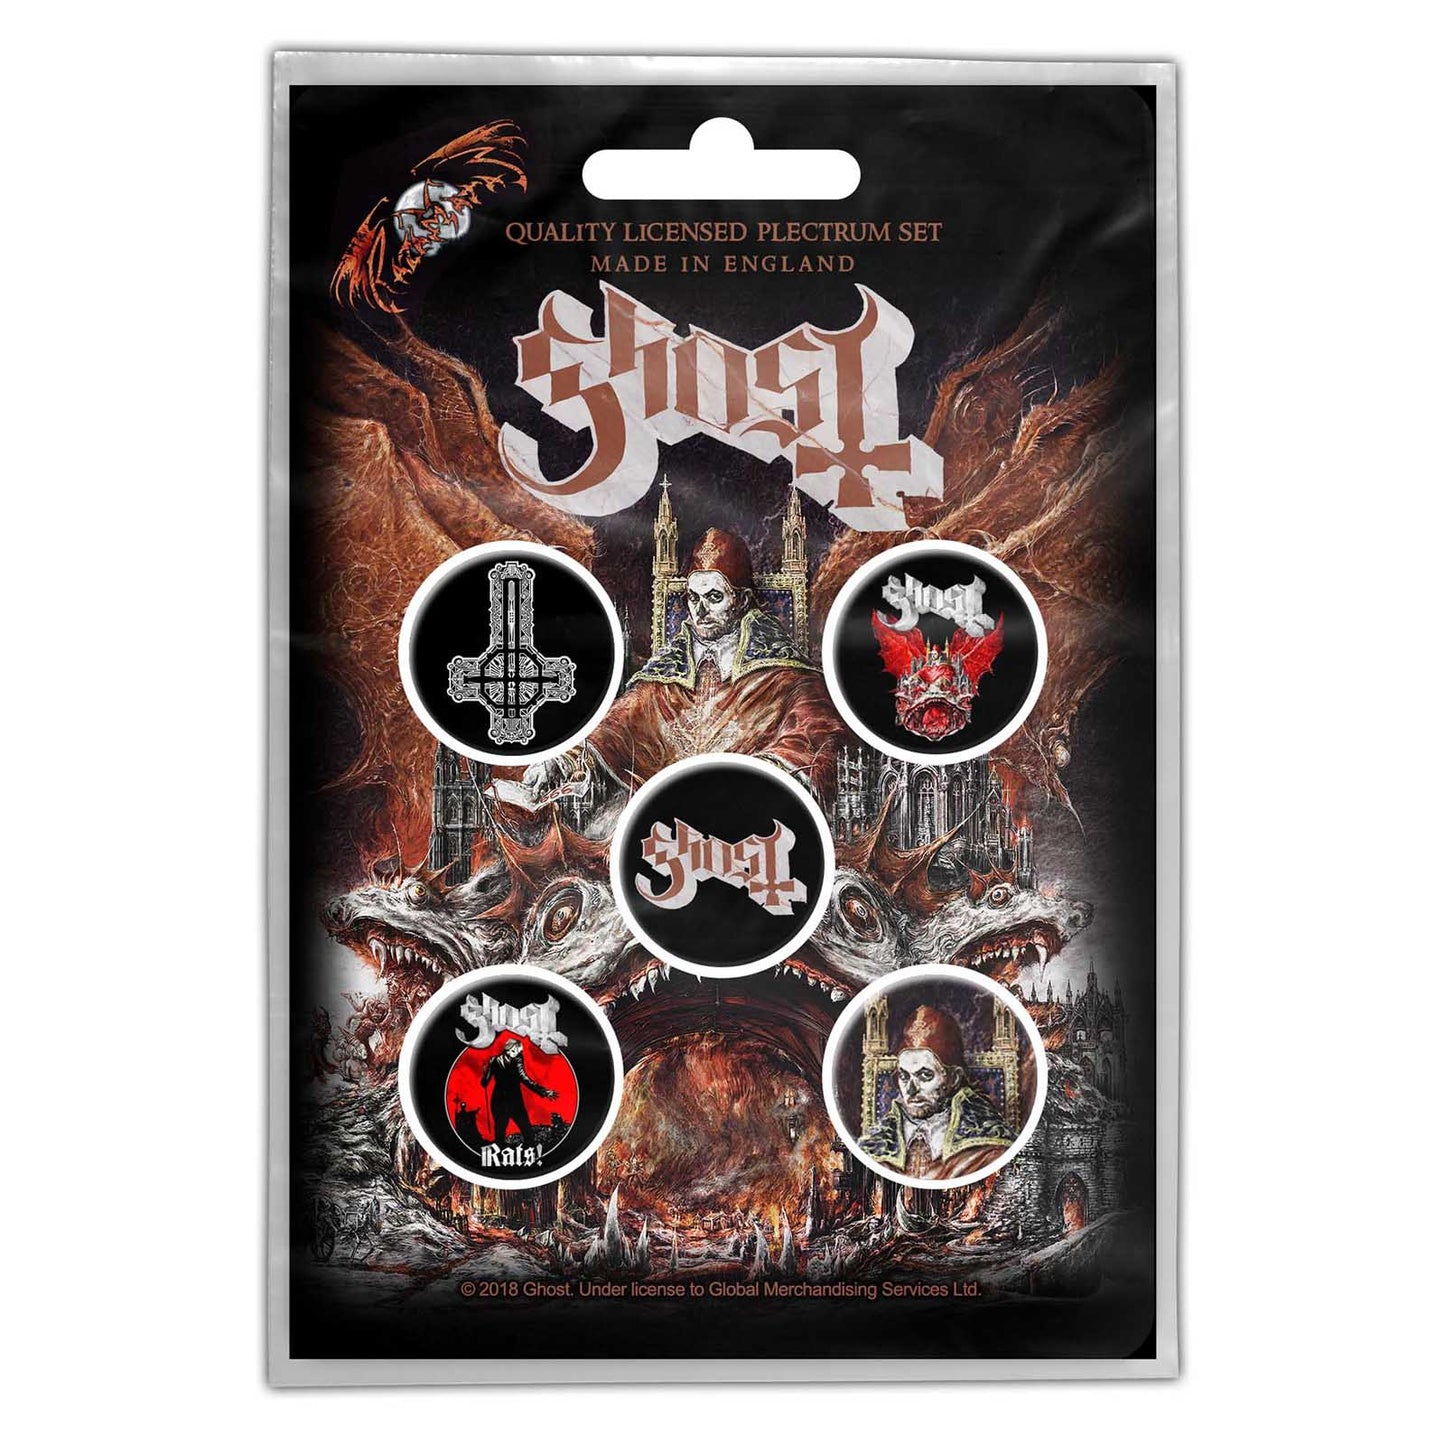 GHOST - Prequelle Badge Pack